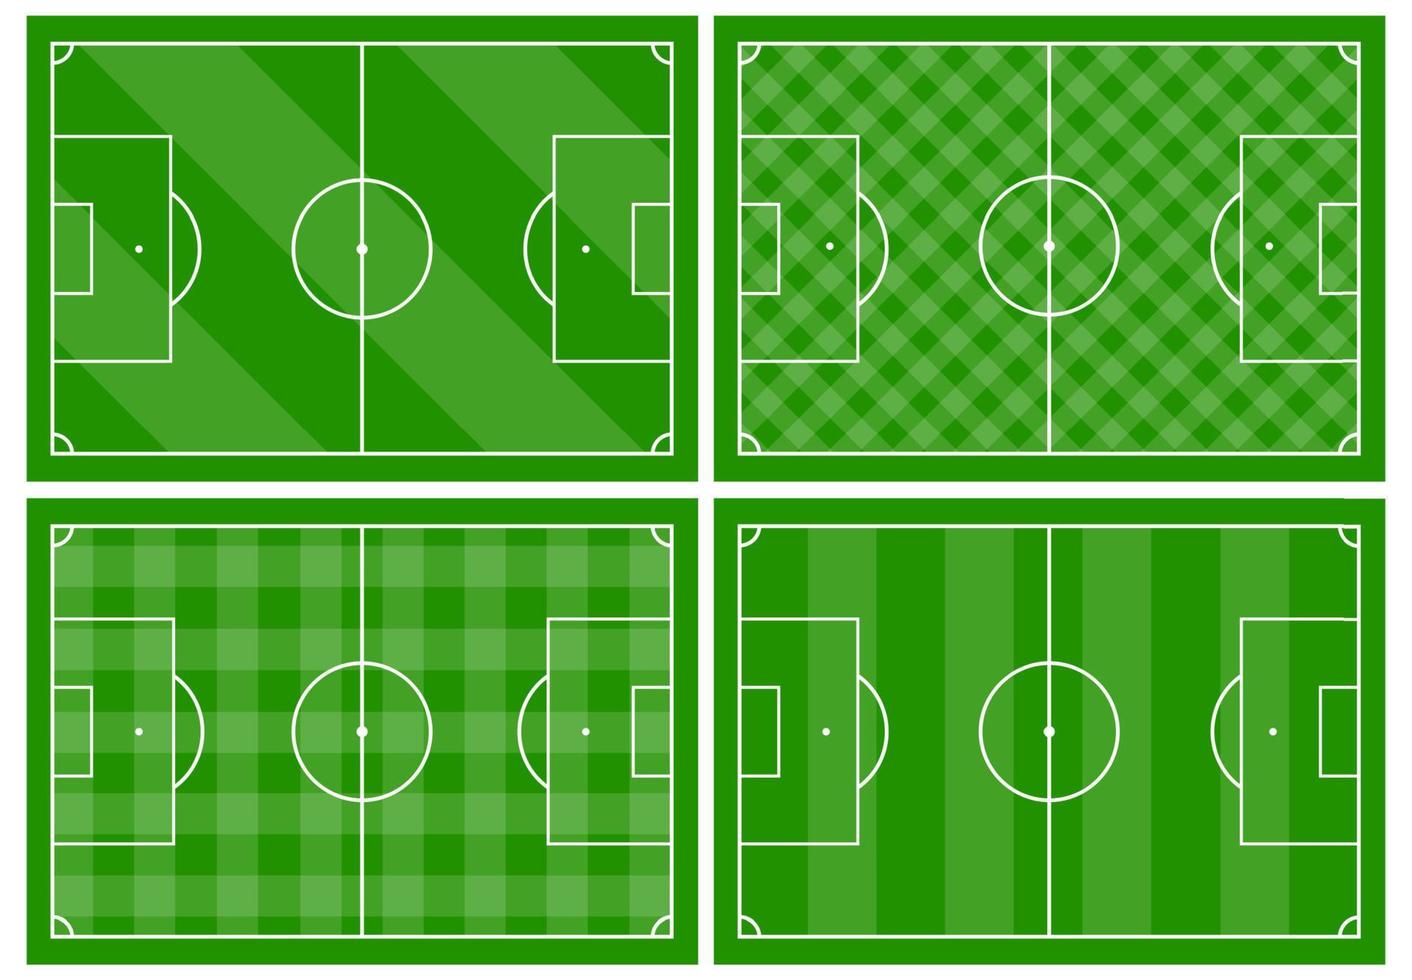 Set of four football fields with different green grass ornaments. Soccer field for playing. Vector illustration